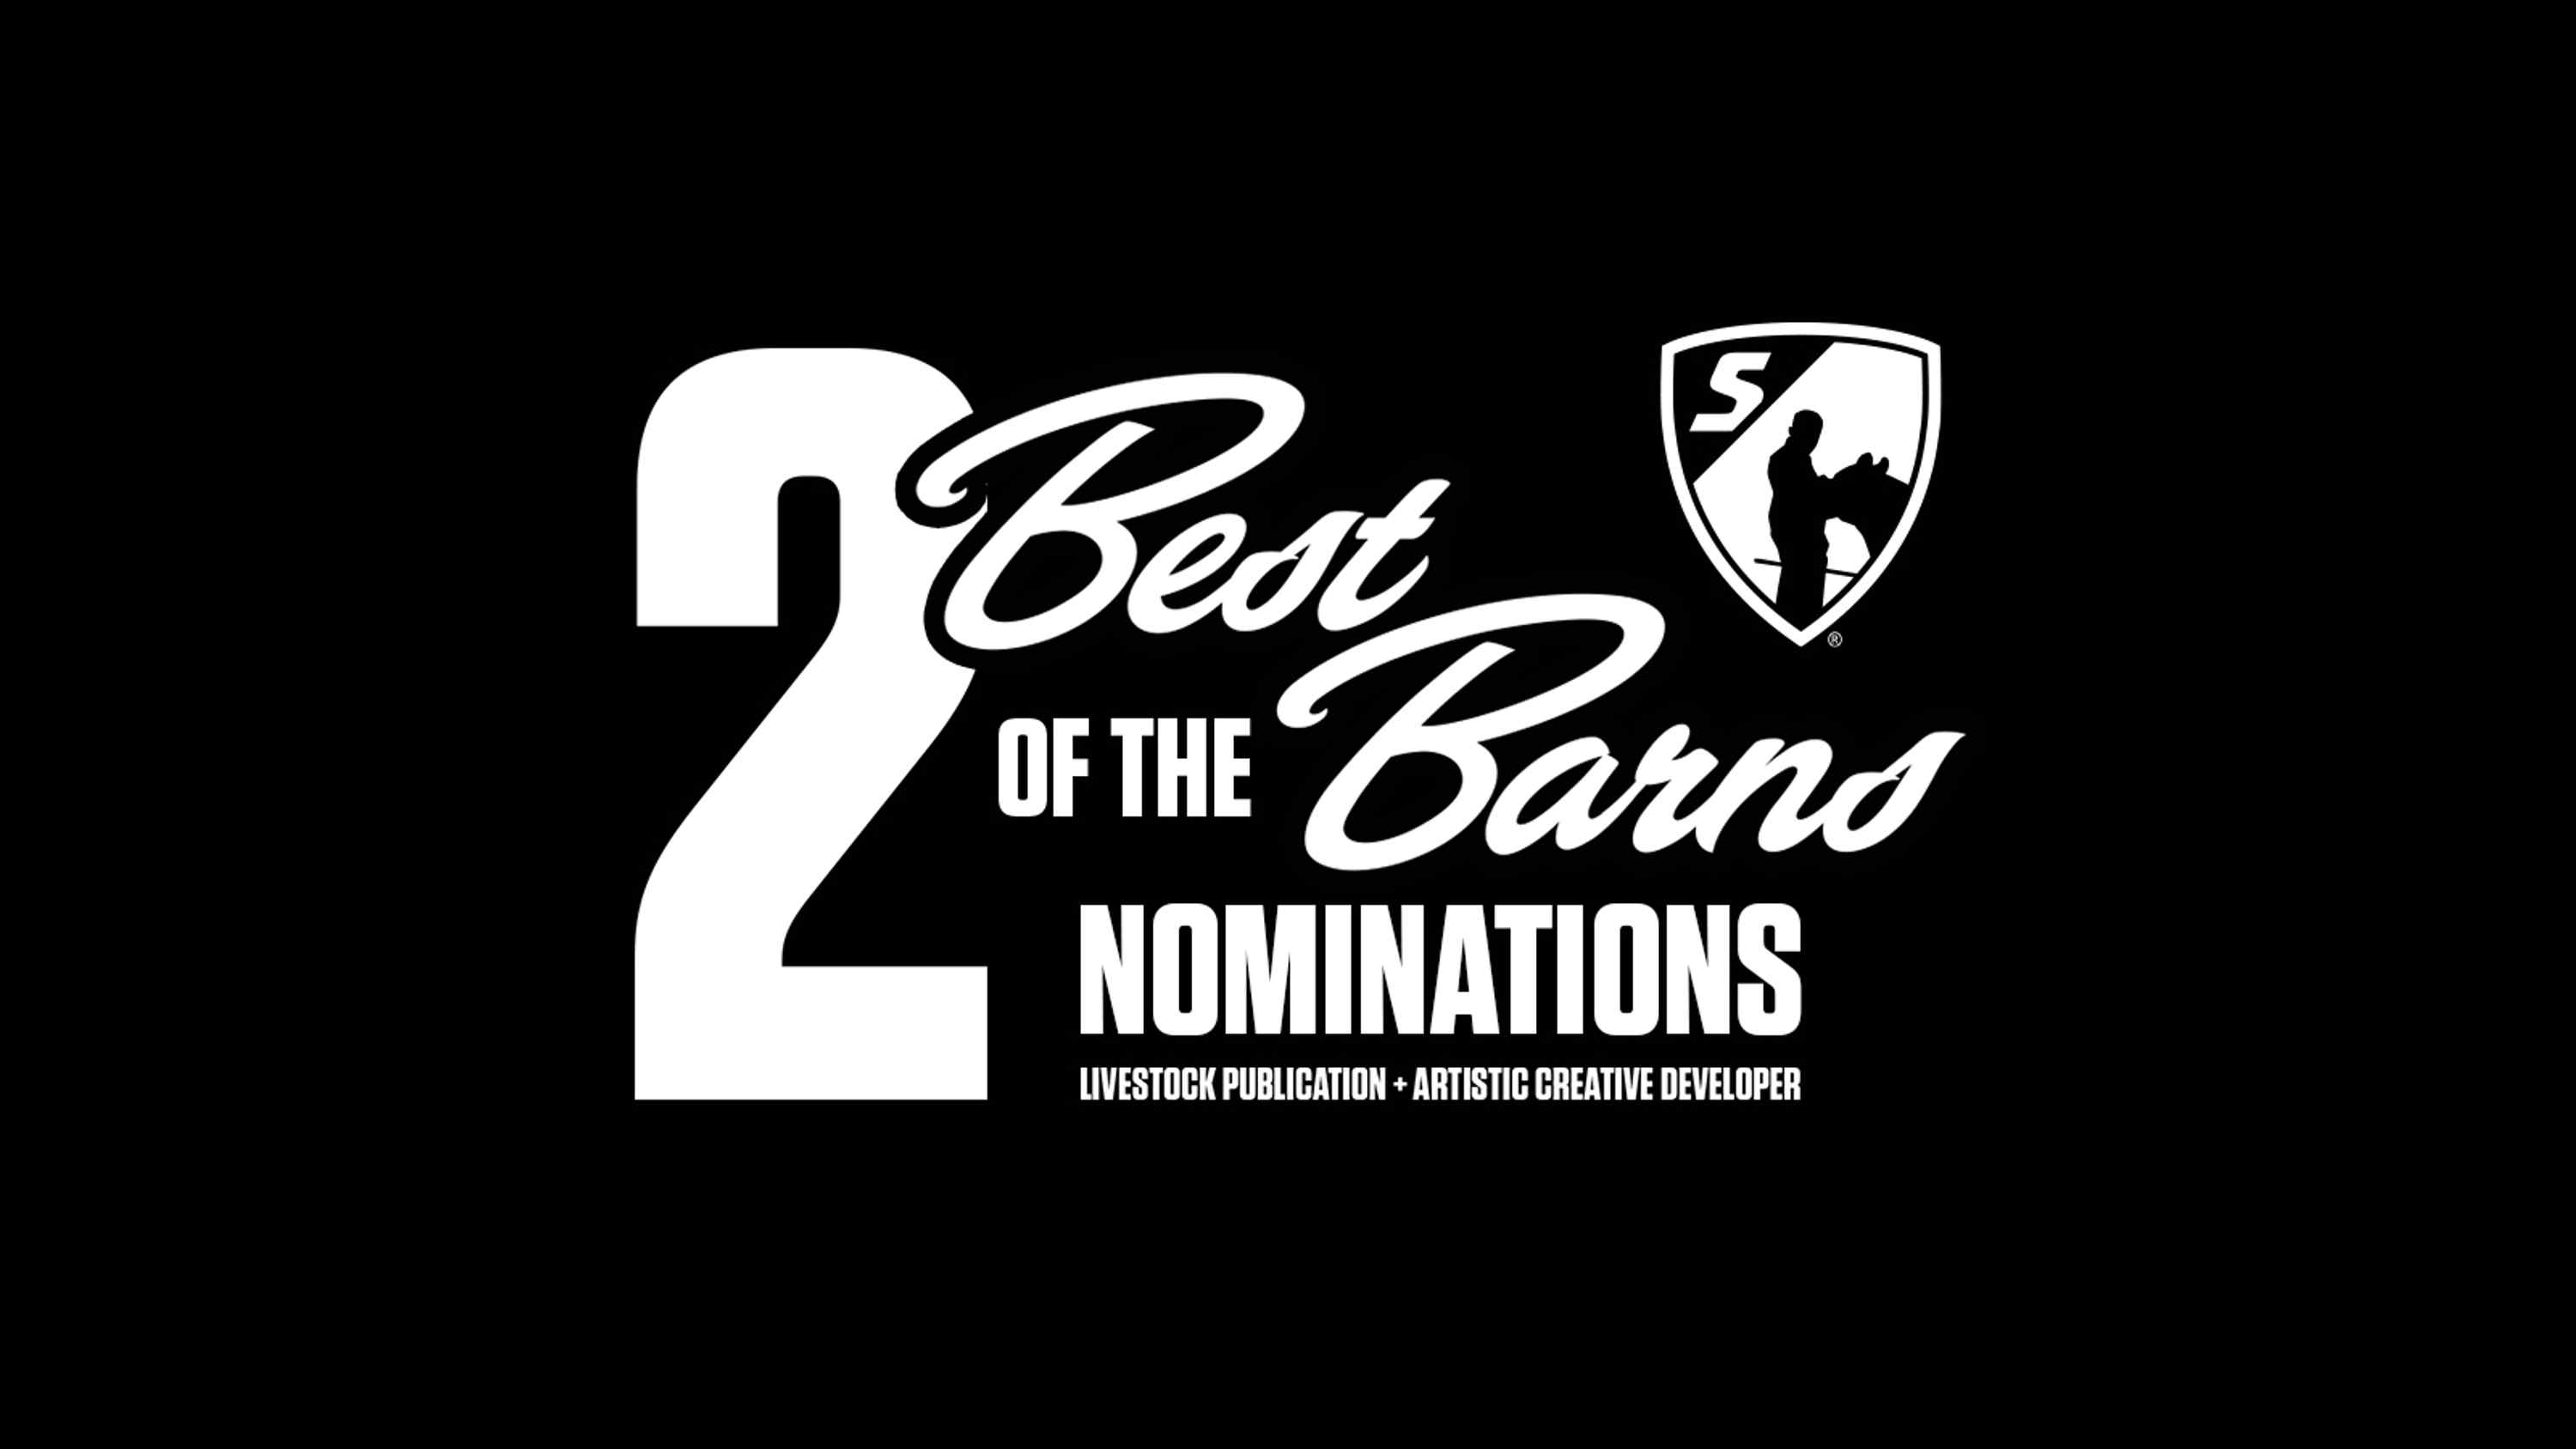 2 Best of the Barns Nominations